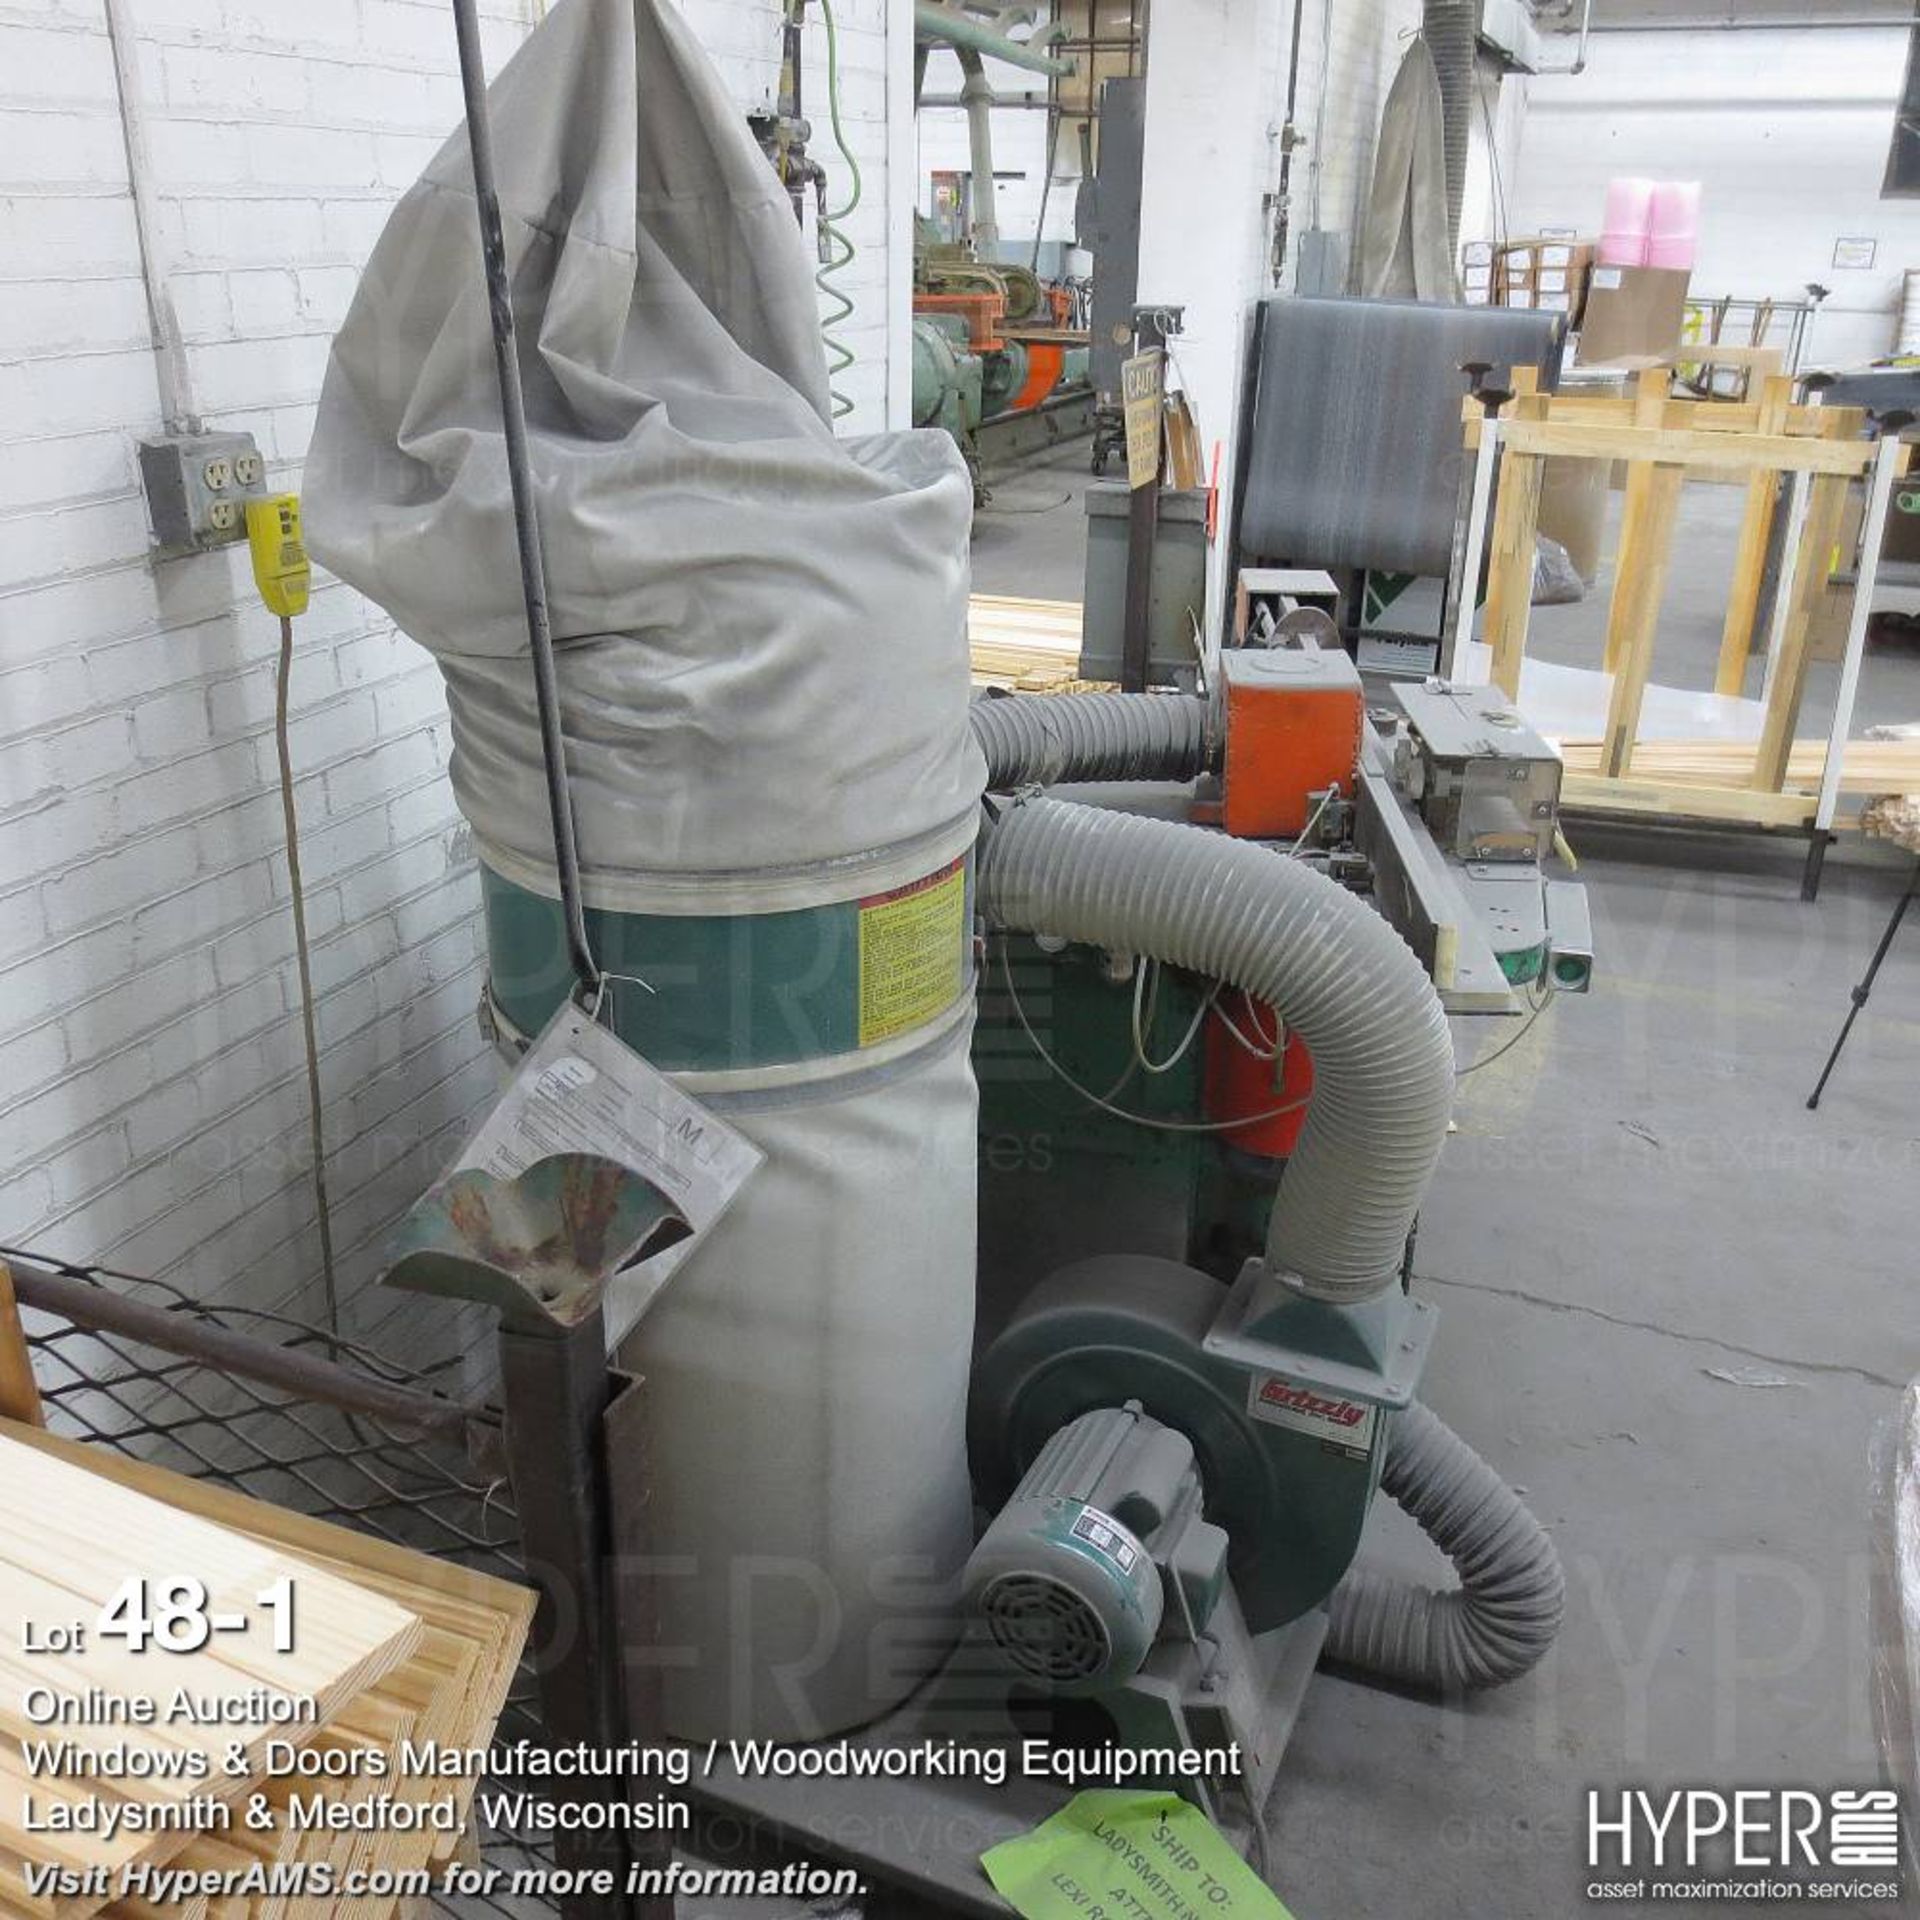 Grizzly 1-1/2 hp dust collector